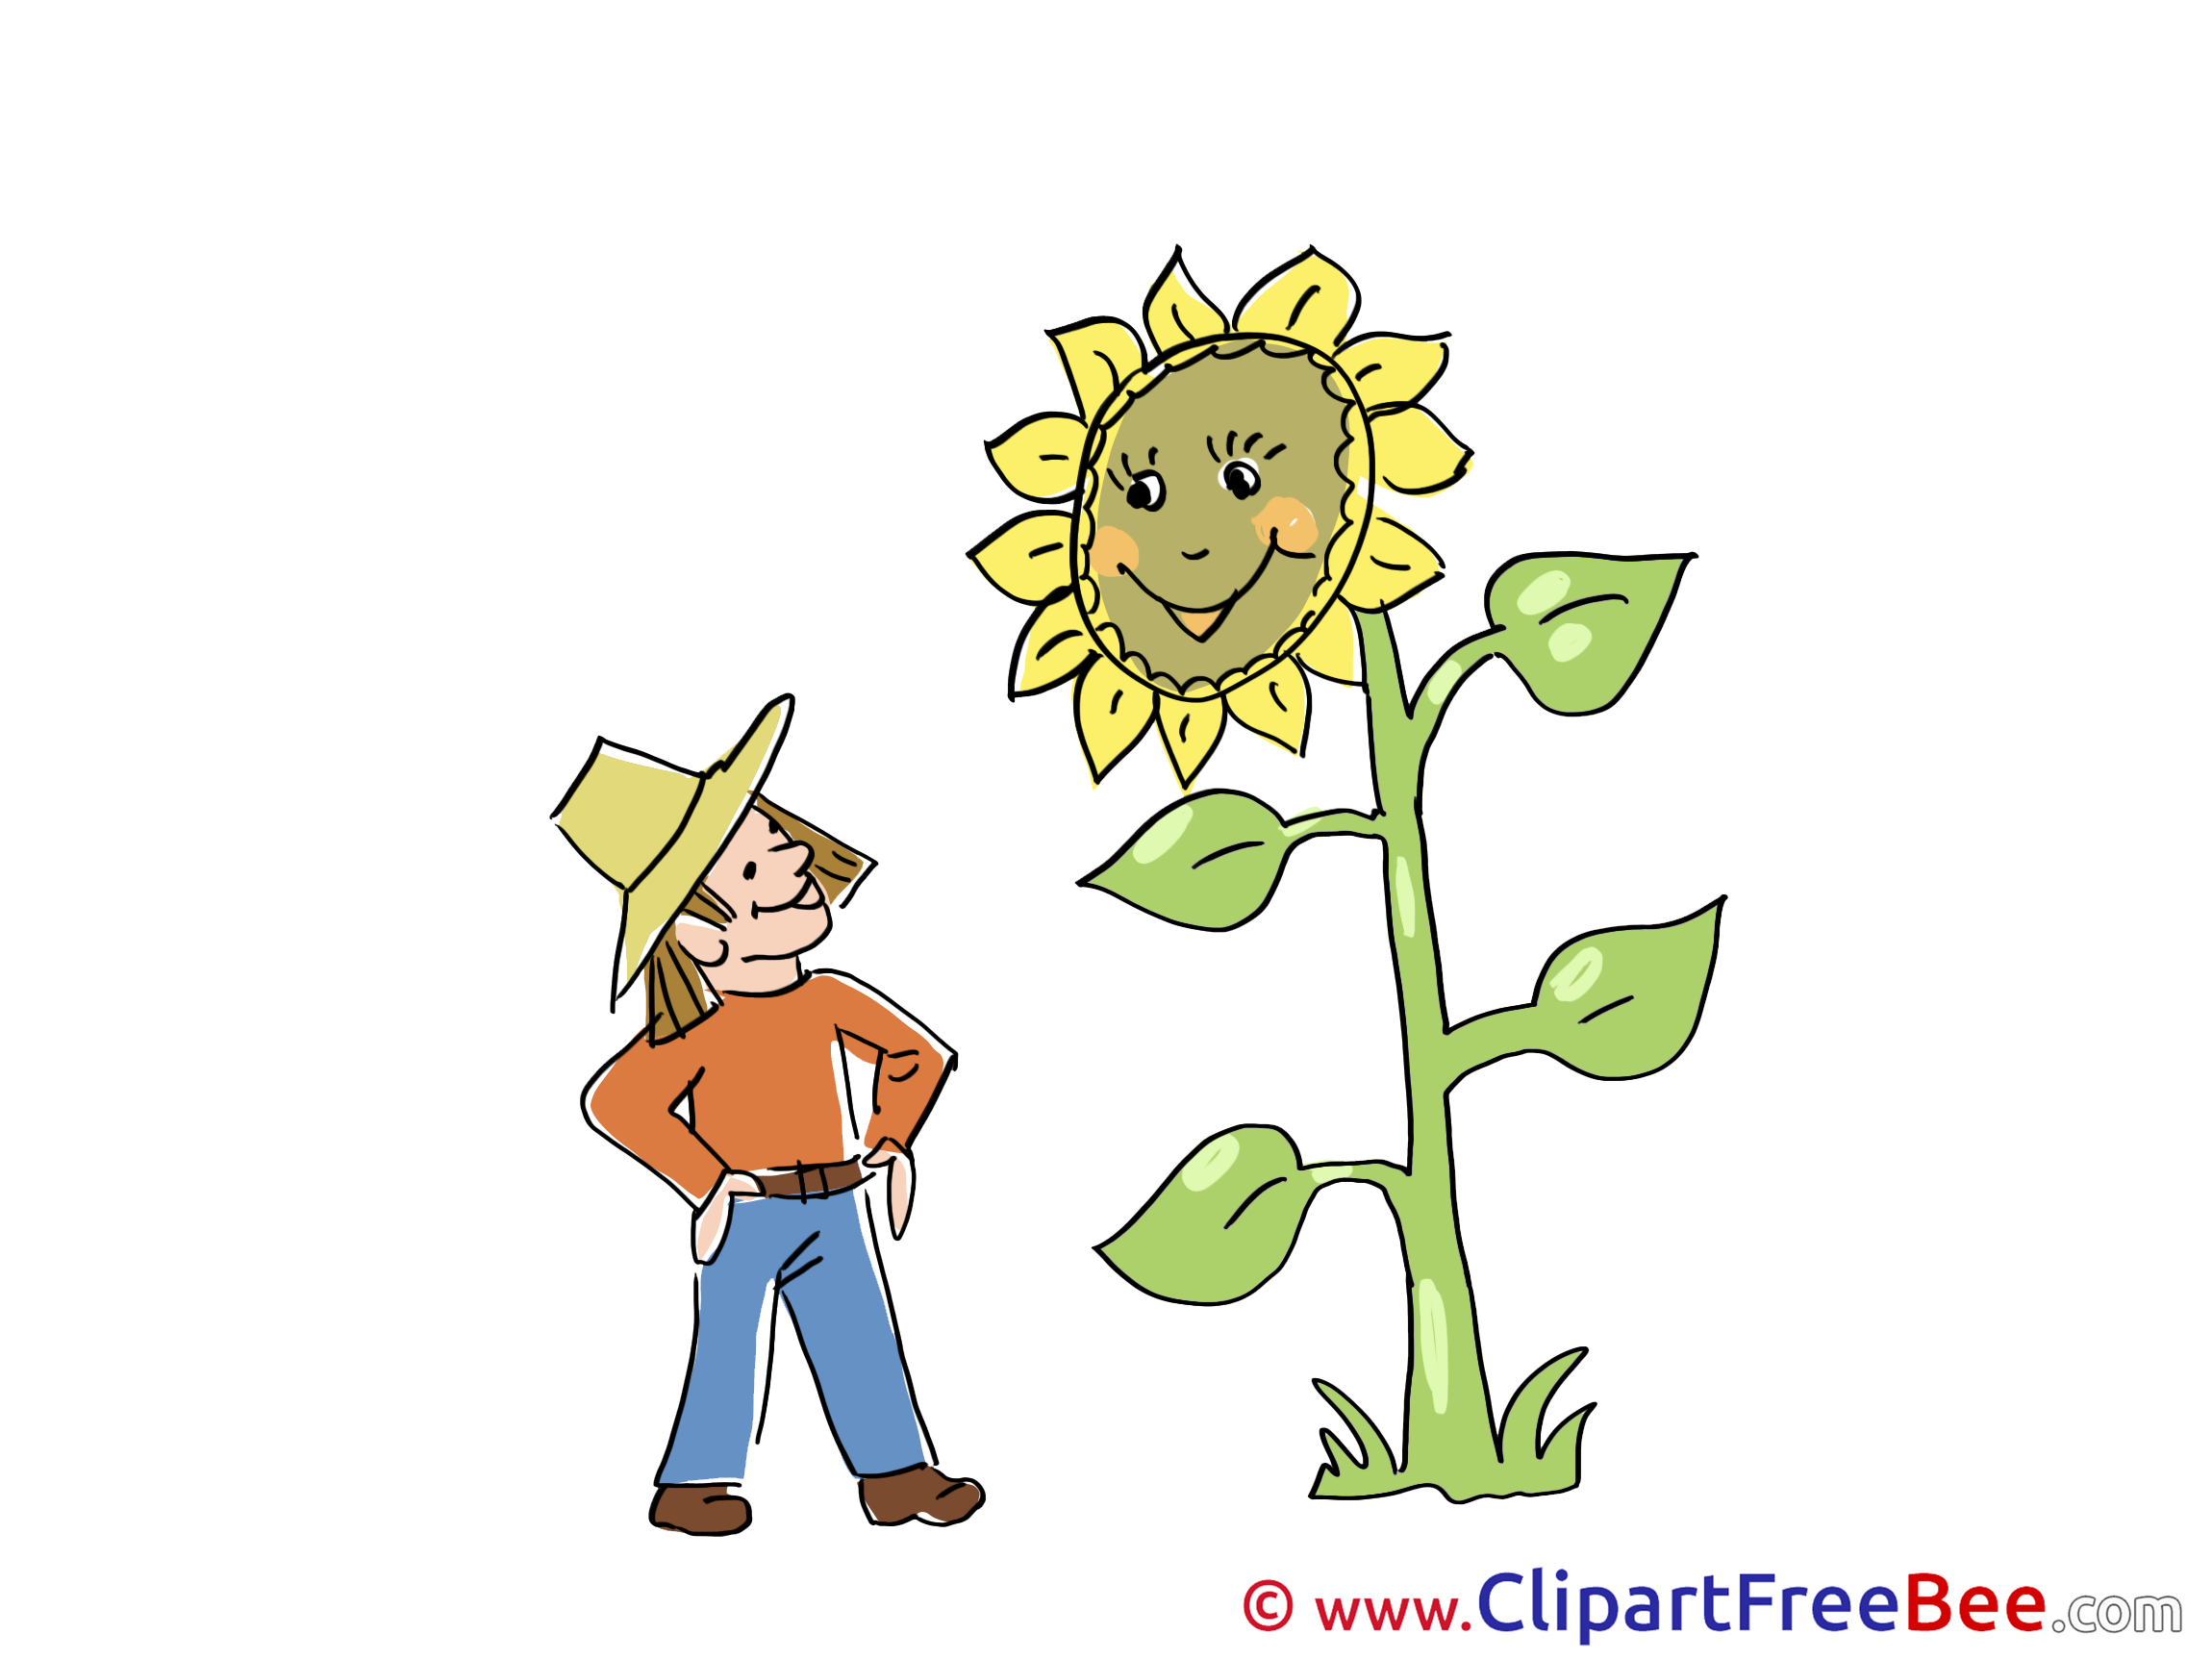 Sunflower printable Images for download